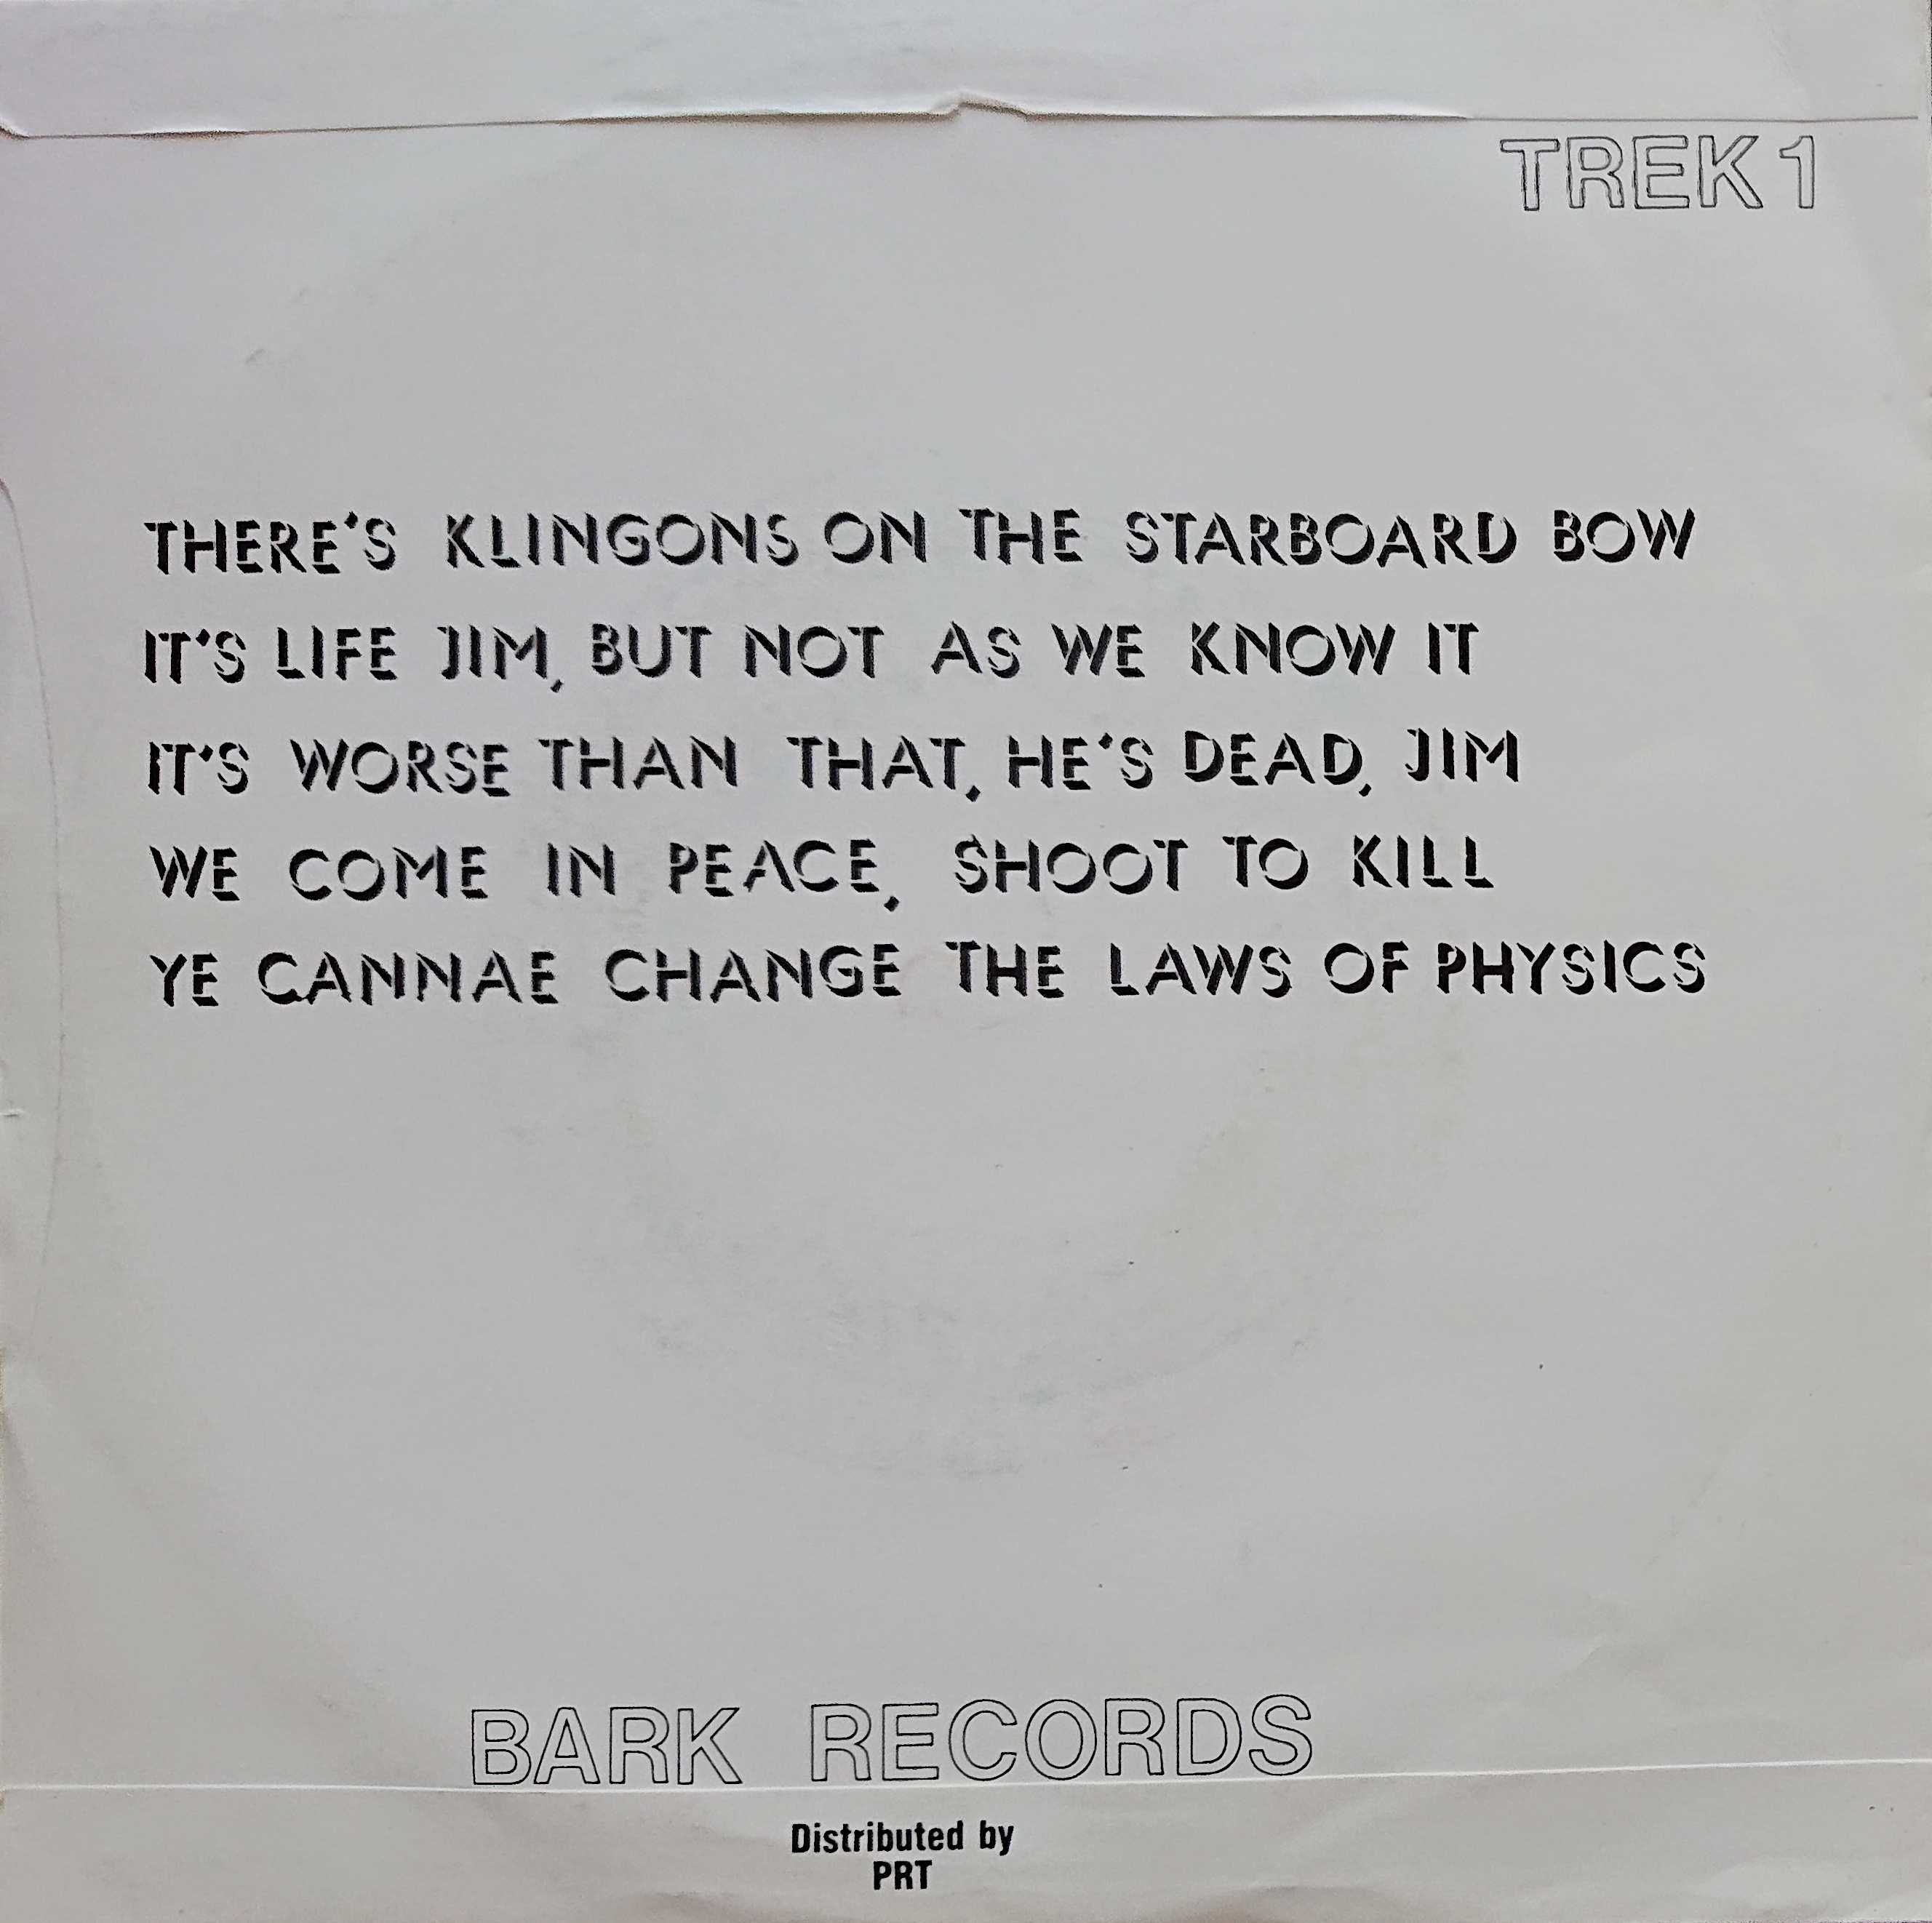 Picture of TREK 1 Star trekkin' by artist The Firm from the BBC records and Tapes library